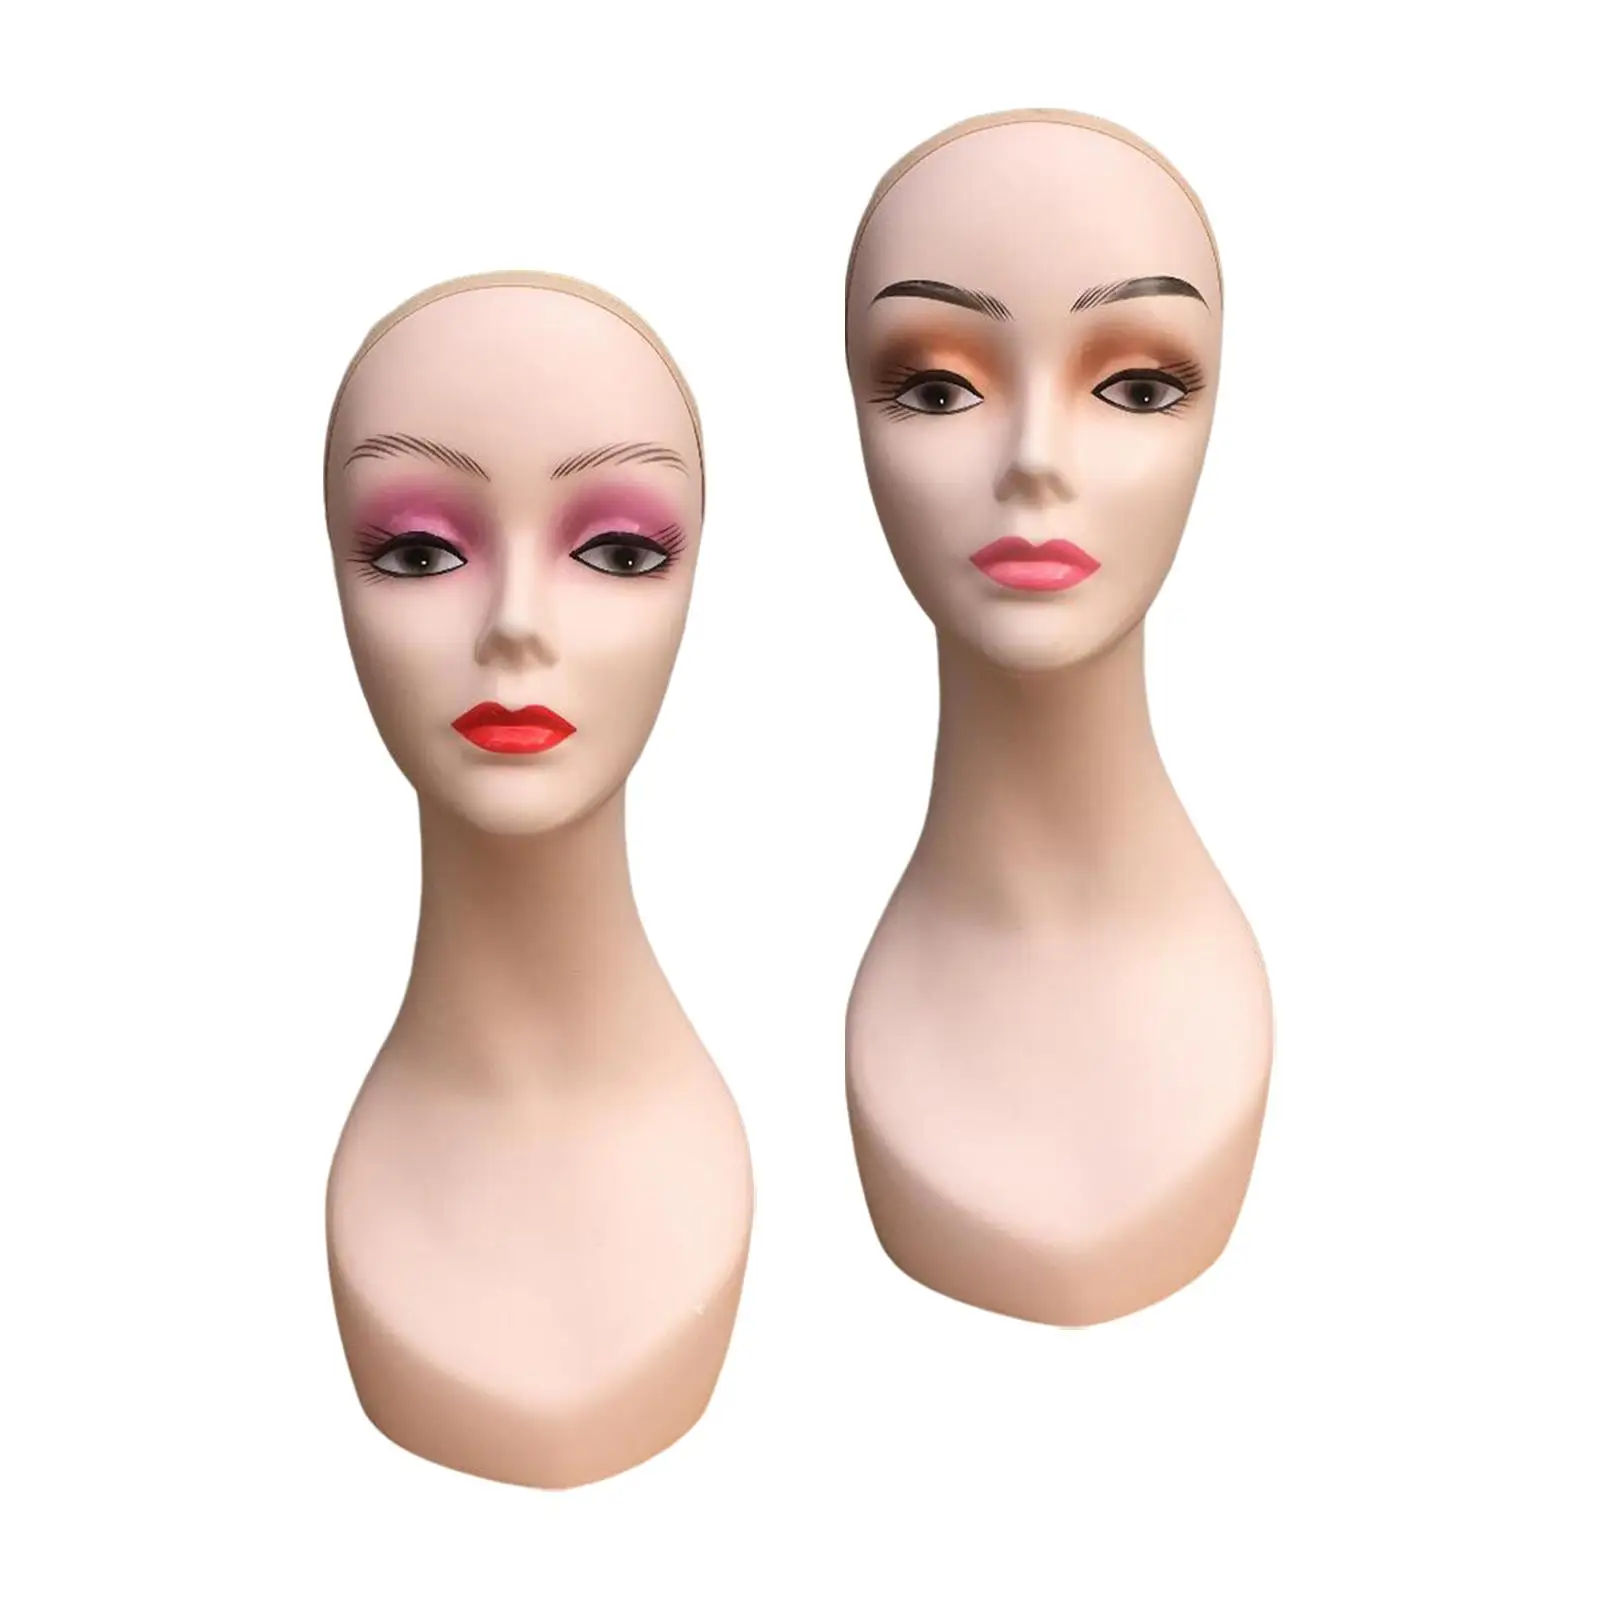 Women Bald Mannequin Head Durable Wig Holder for Headwear Hairpieces Glasses